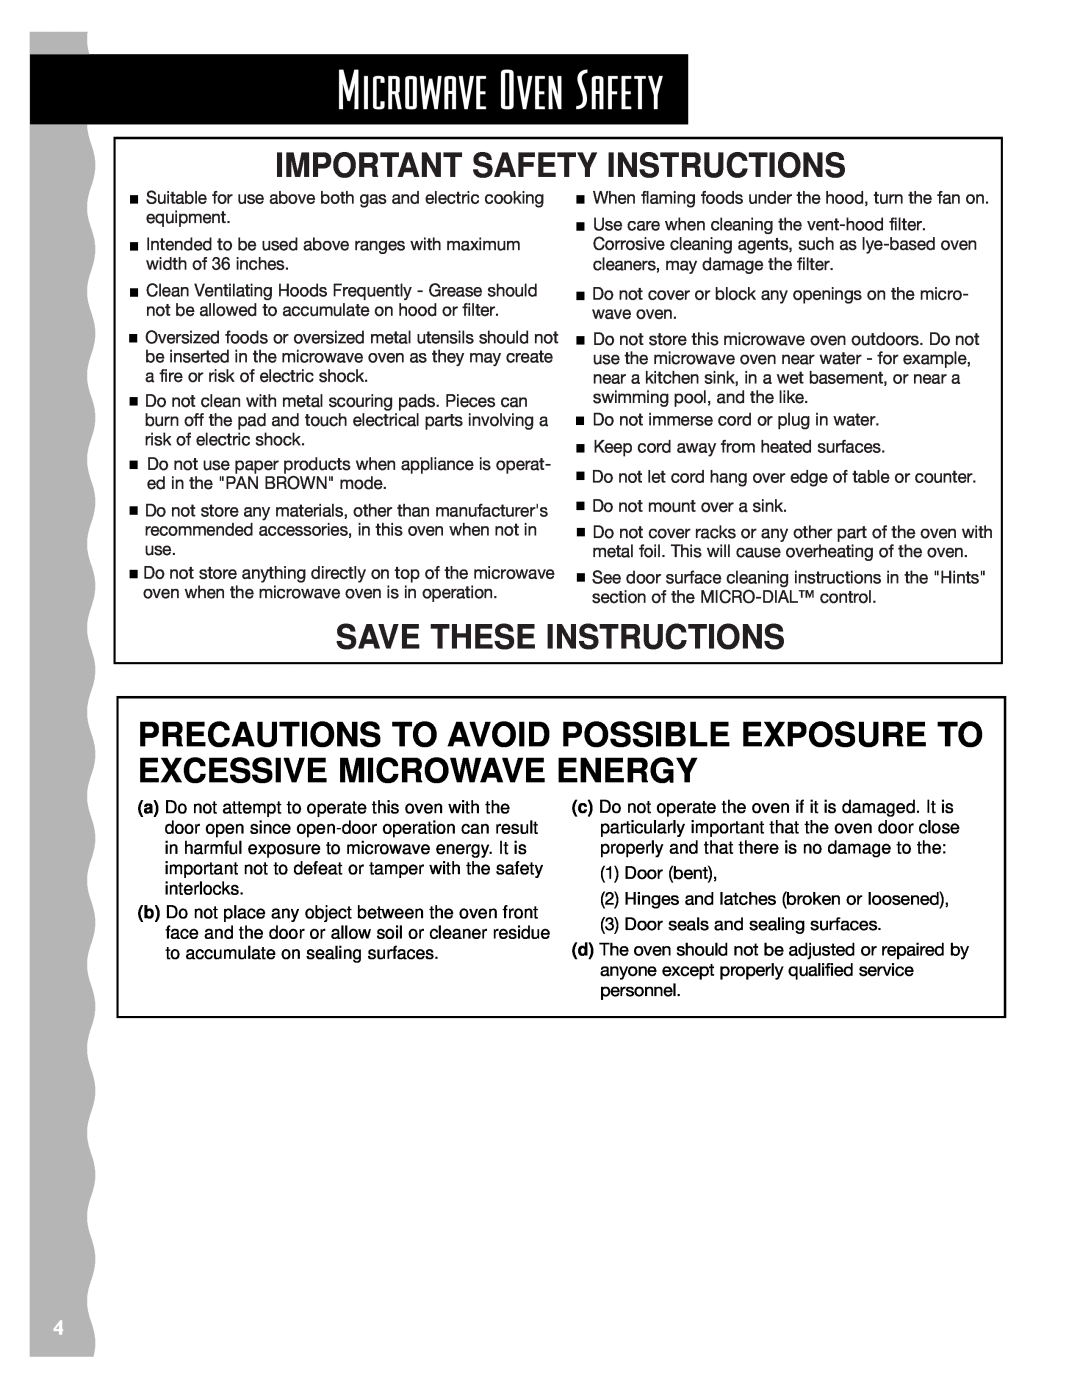 Whirlpool YKHMS147H Precautions To Avoid Possible Exposure To Excessive Microwave Energy, Microwave Oven Safety 